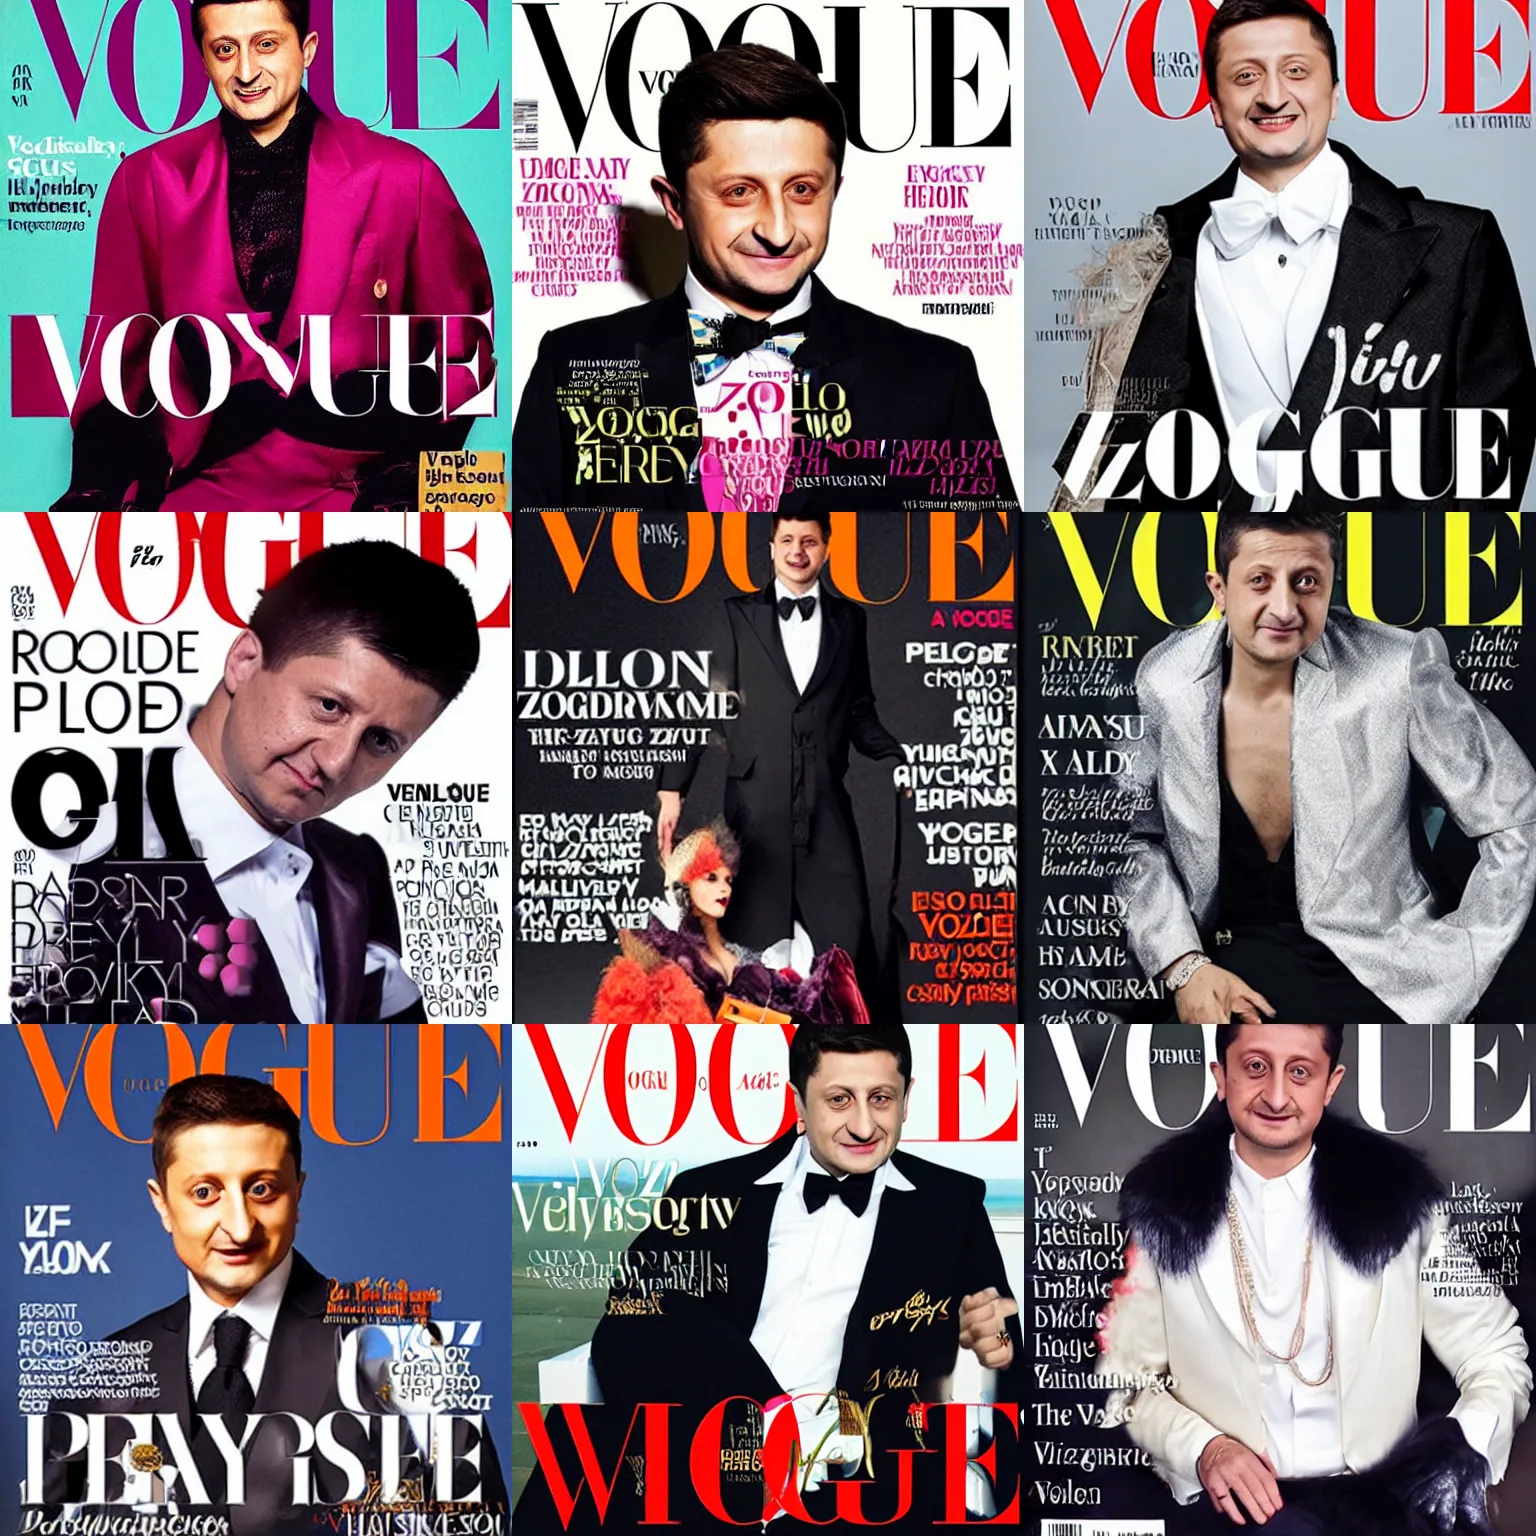 Prompt: Volodymyr Zelensky dressed as a pimp on the cover of the Vogue magazine